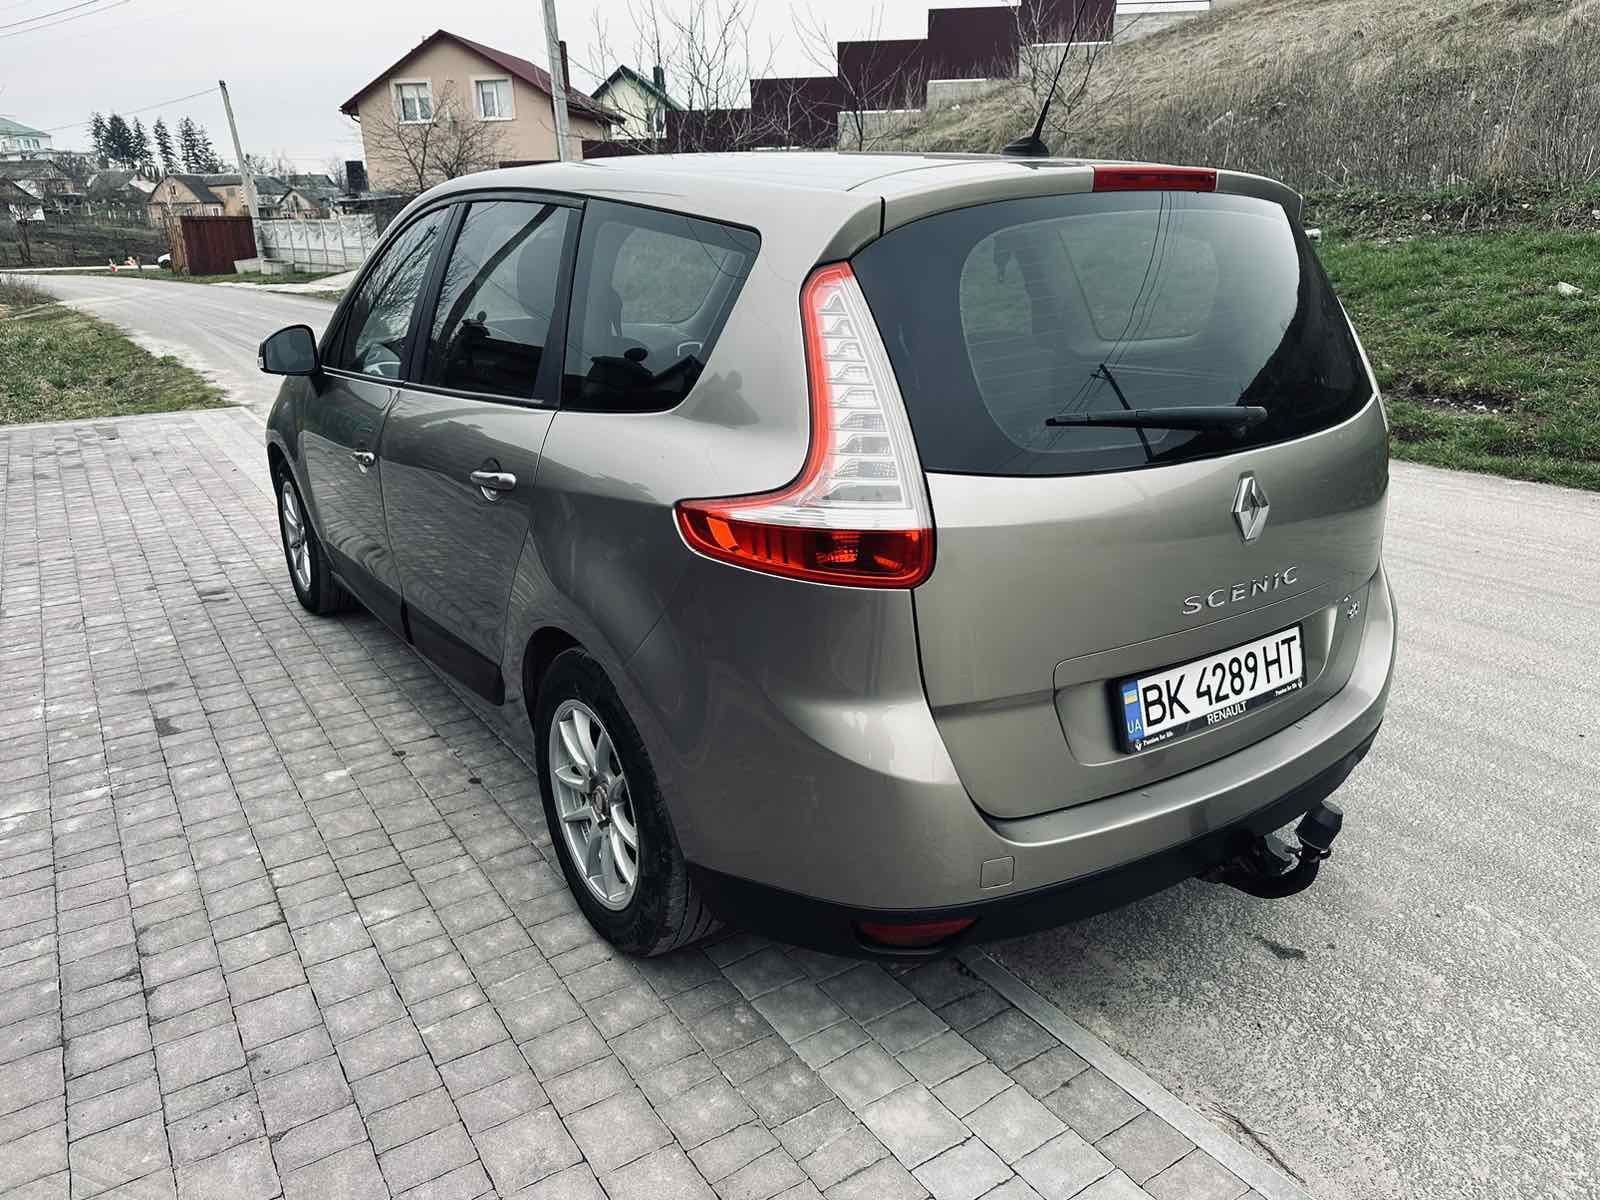 Renault Grand Scenic 3 1,5 dci 2009 рік